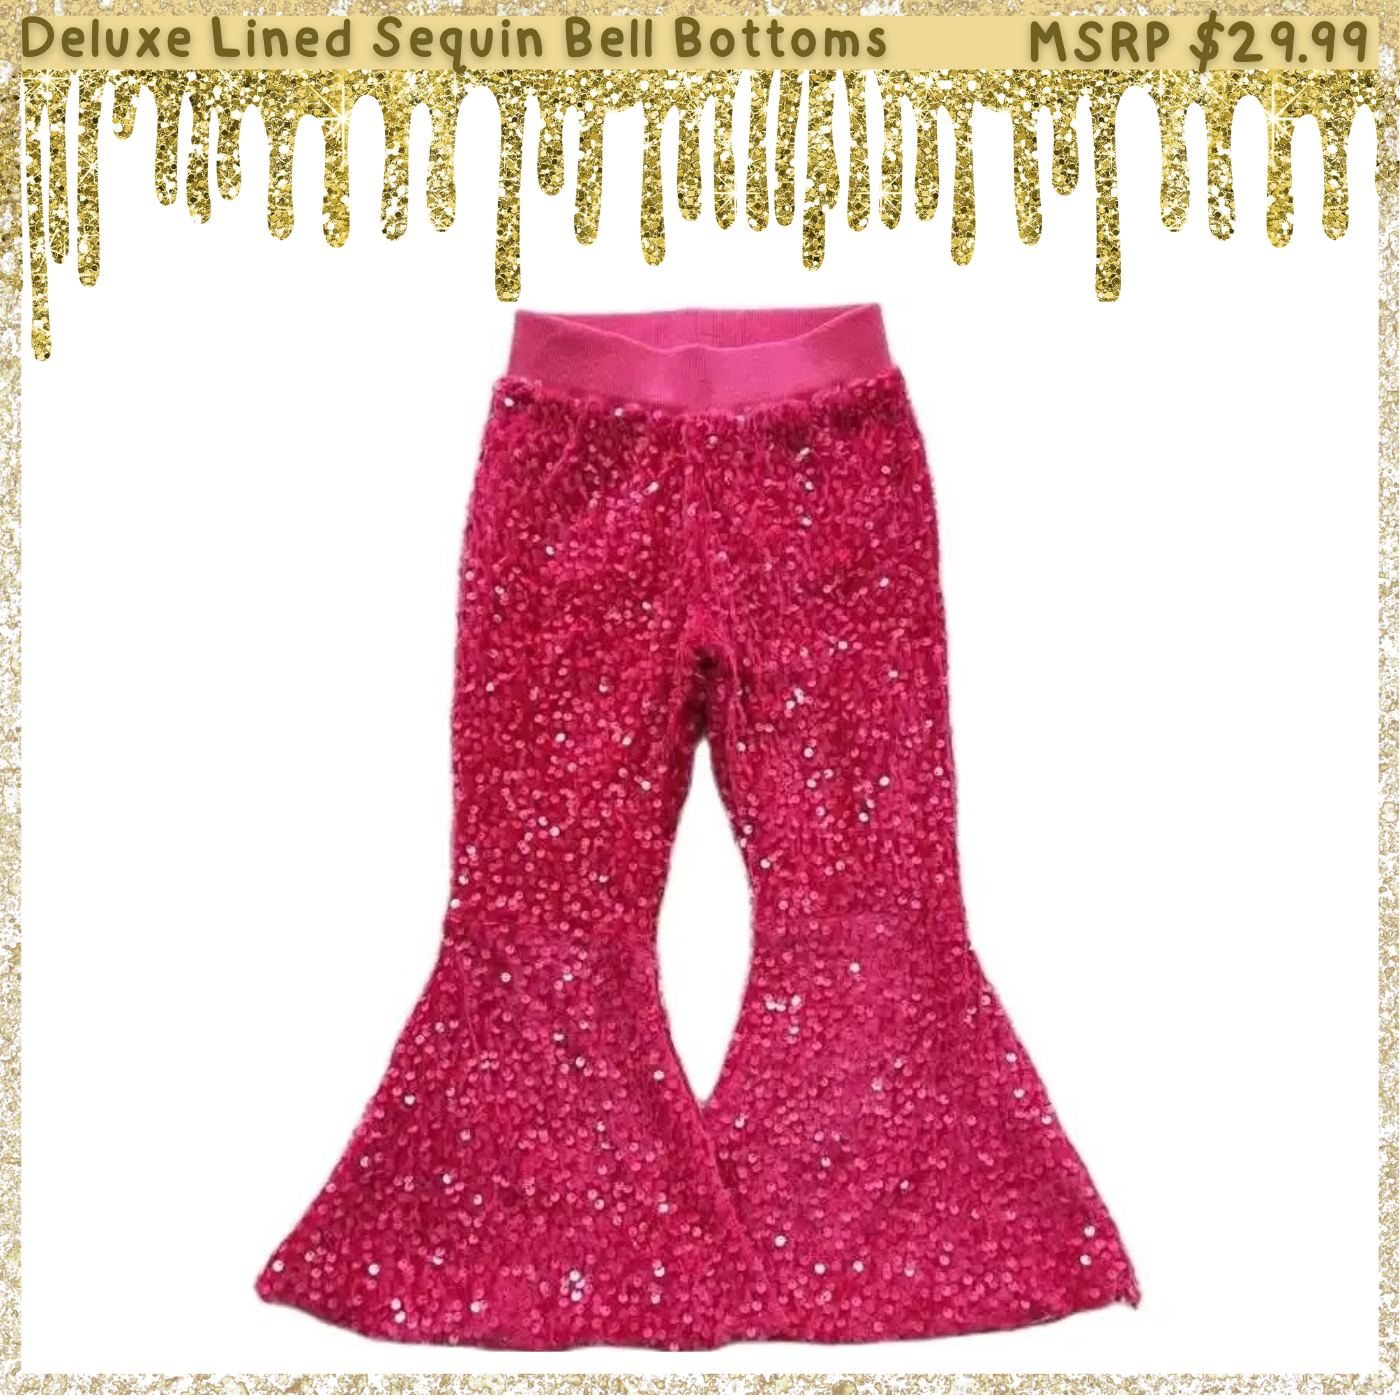 SUMMER 4-Pack: Girls Deluxe Lined Sequin Bell Bottoms (Flare Pants)